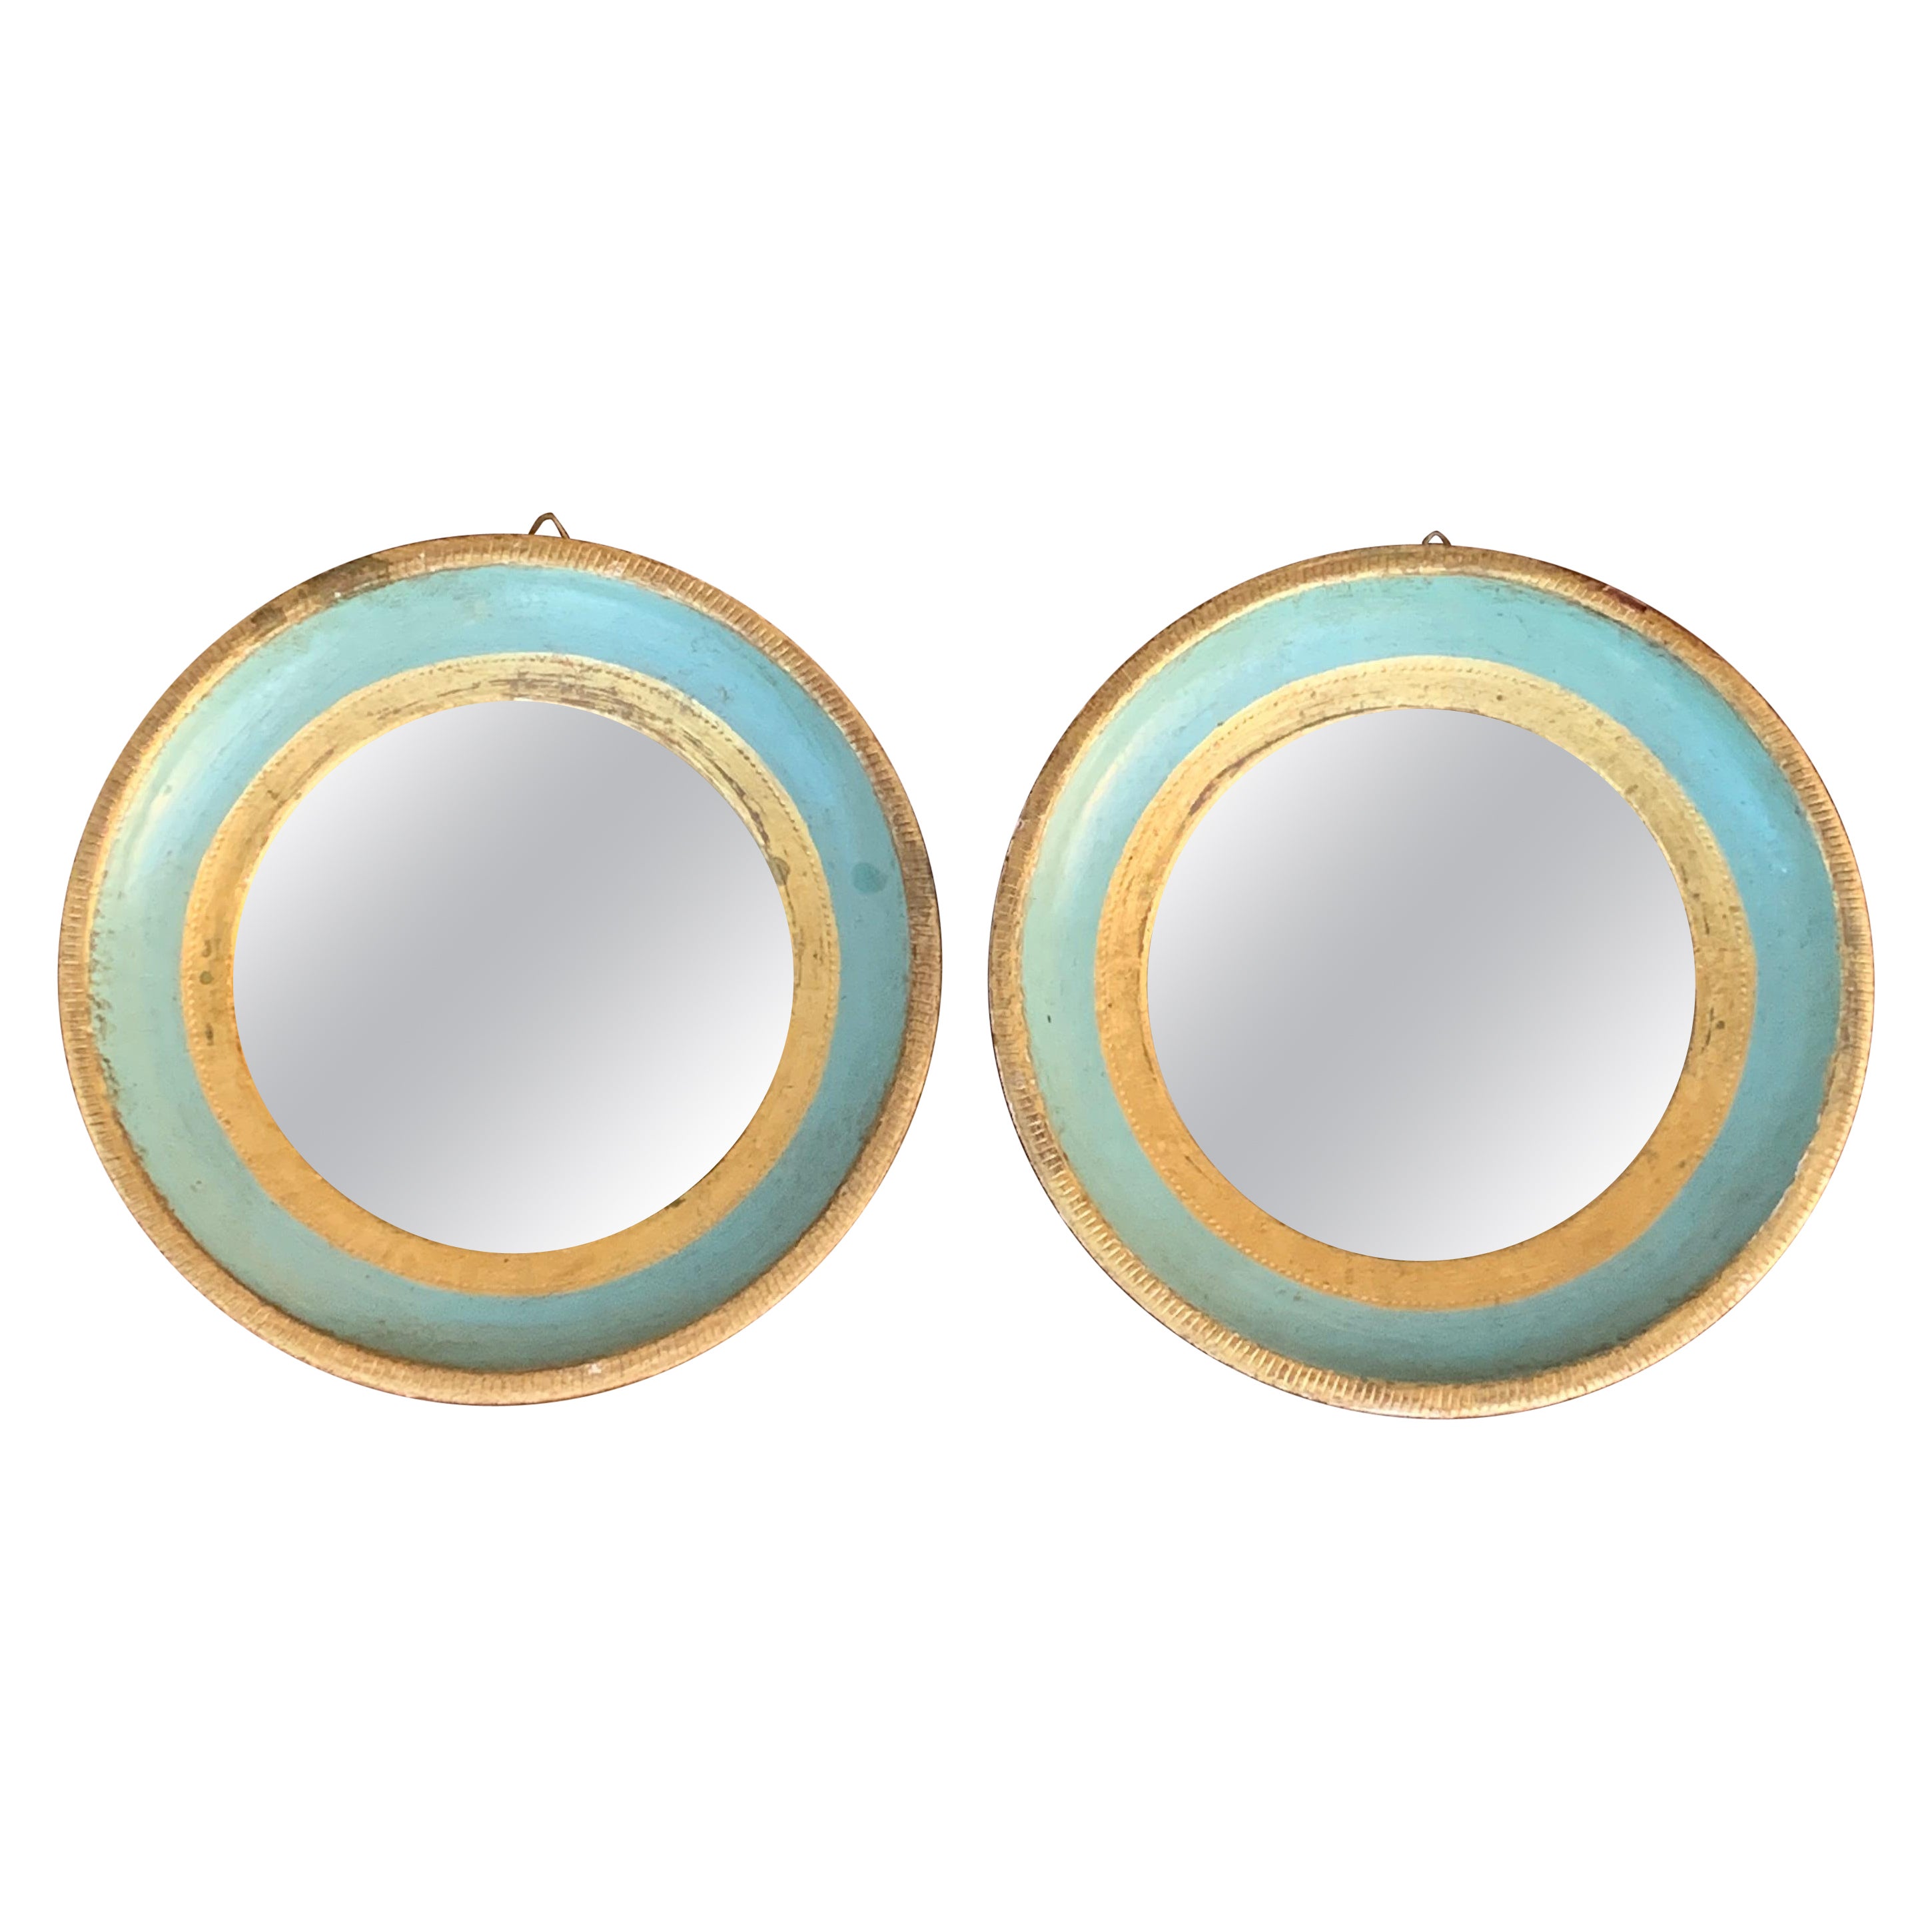 Italian Florentine Green and Gold Round Wall Mirrors, Pair For Sale